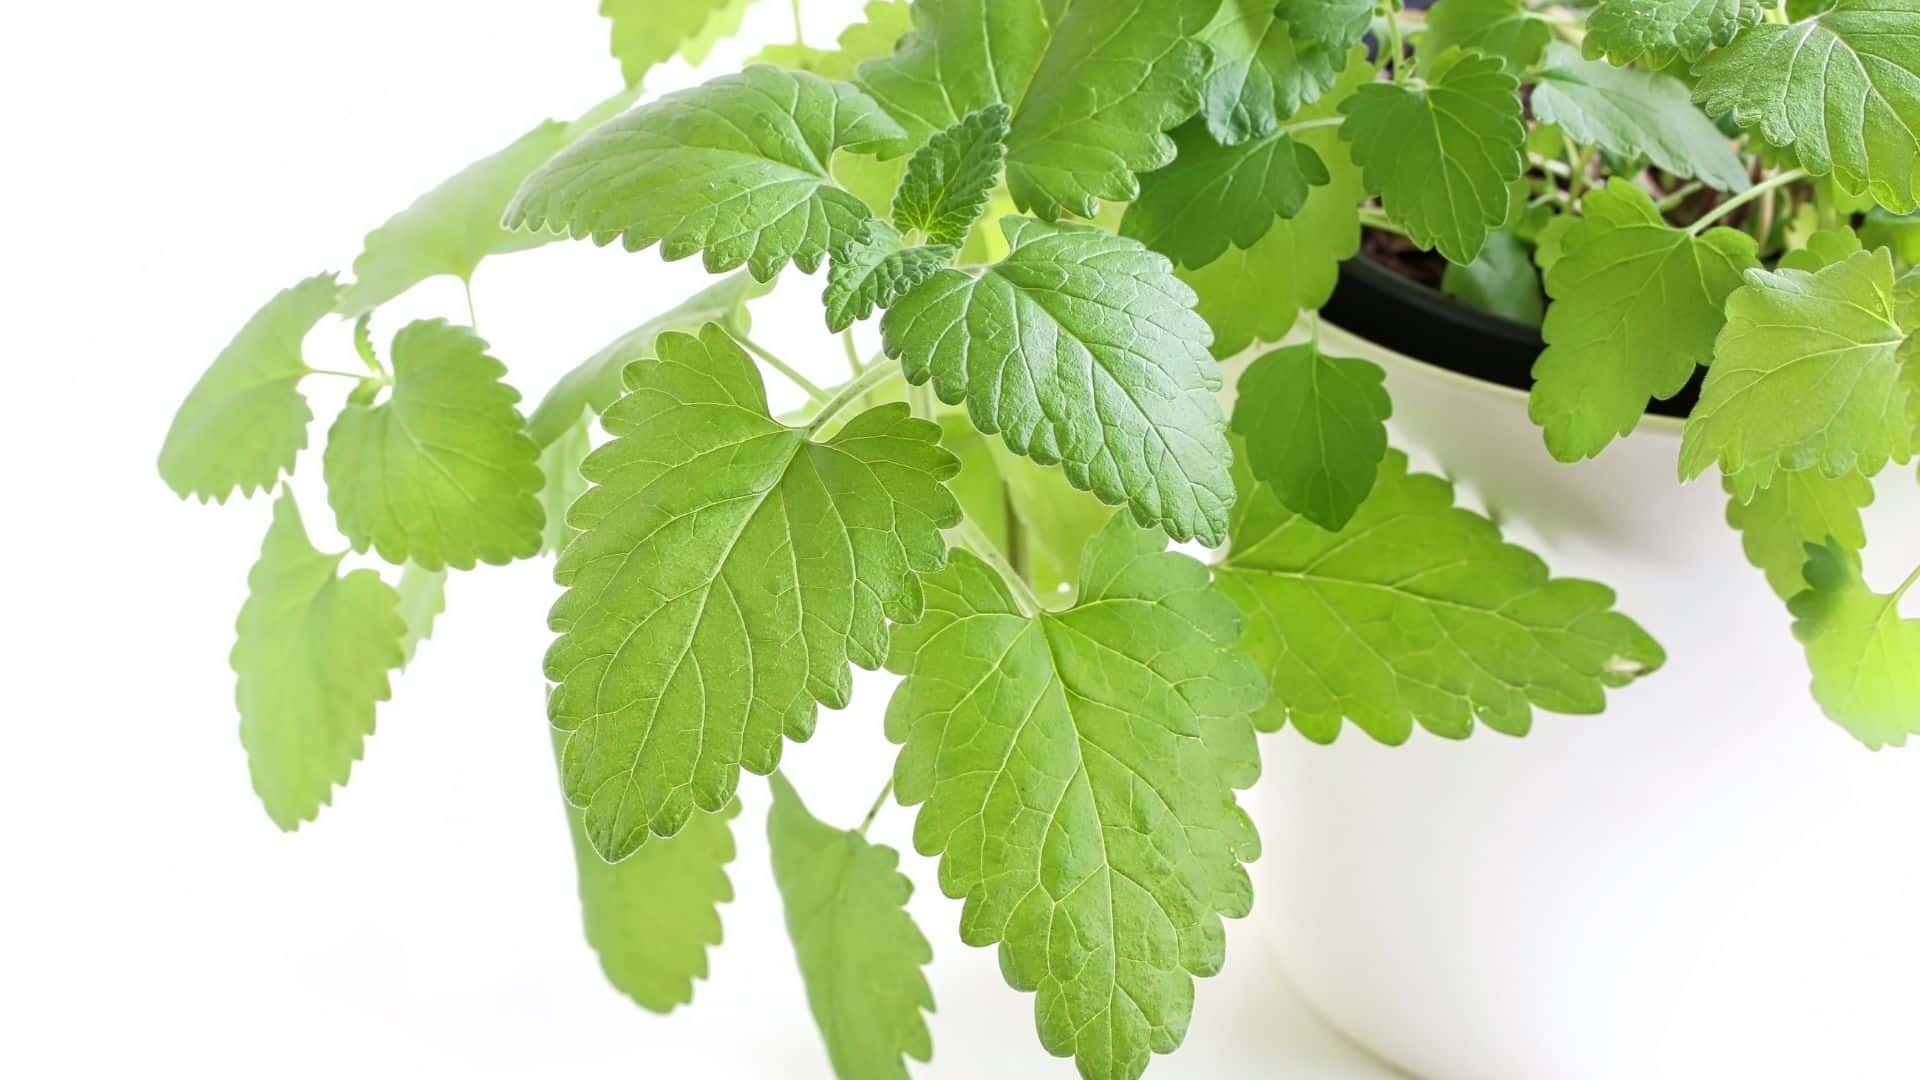 25 Plants and Herbs That Naturally Repel Mosquitoes at Home